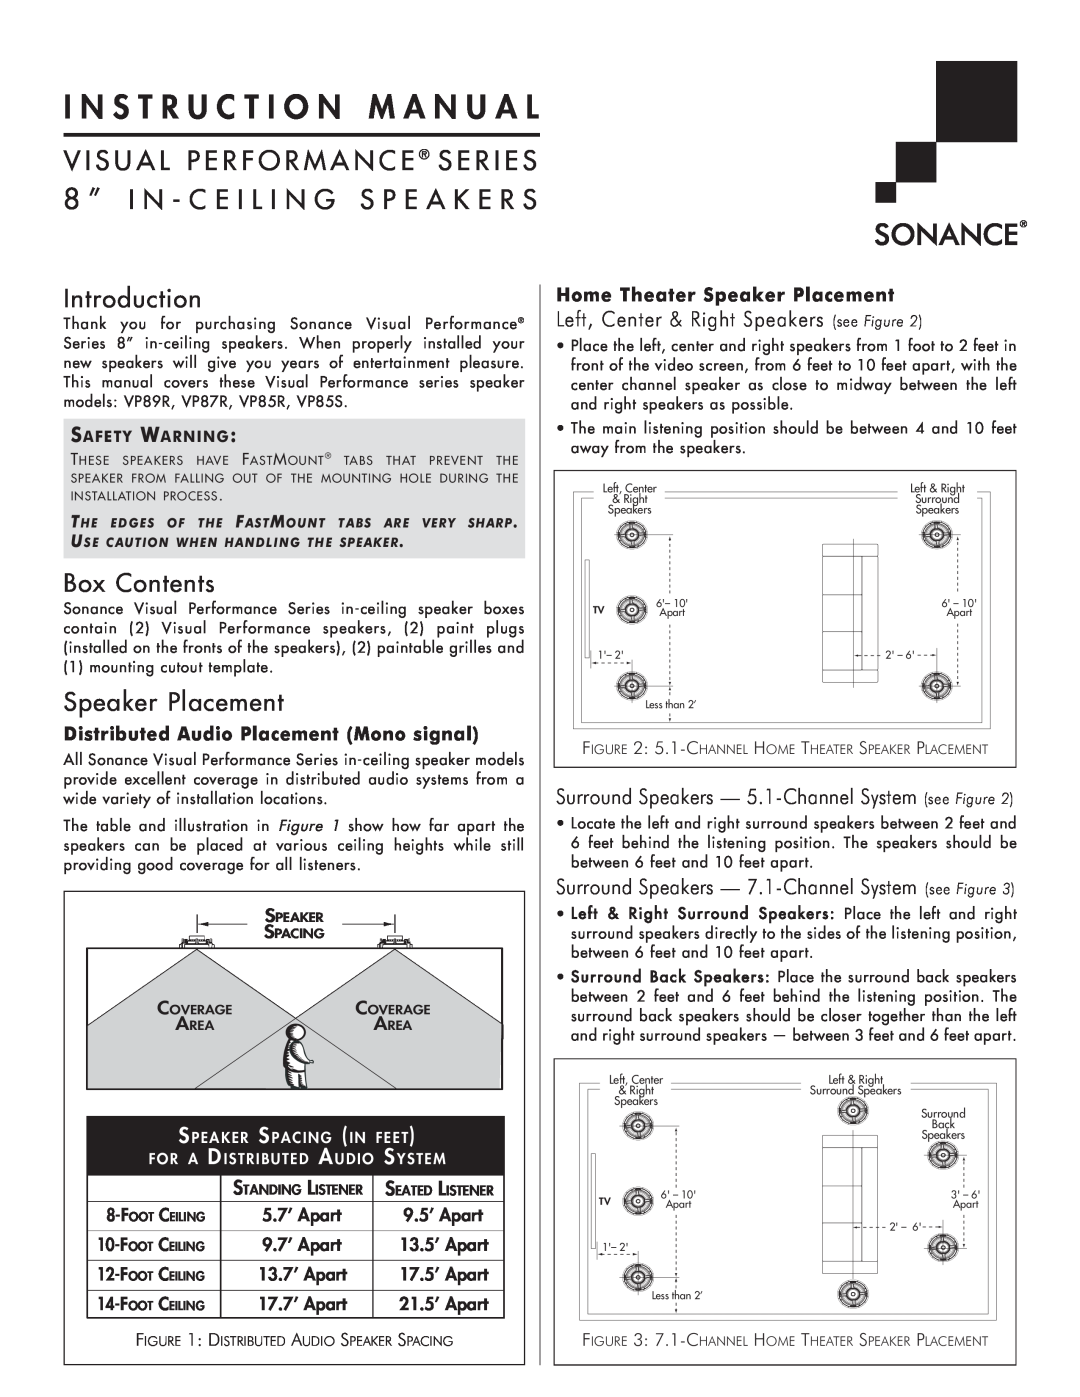 Sonance VP85S instruction manual Introduction, Box Contents, Speaker Placement, Distributed Audio Placement Mono signal 